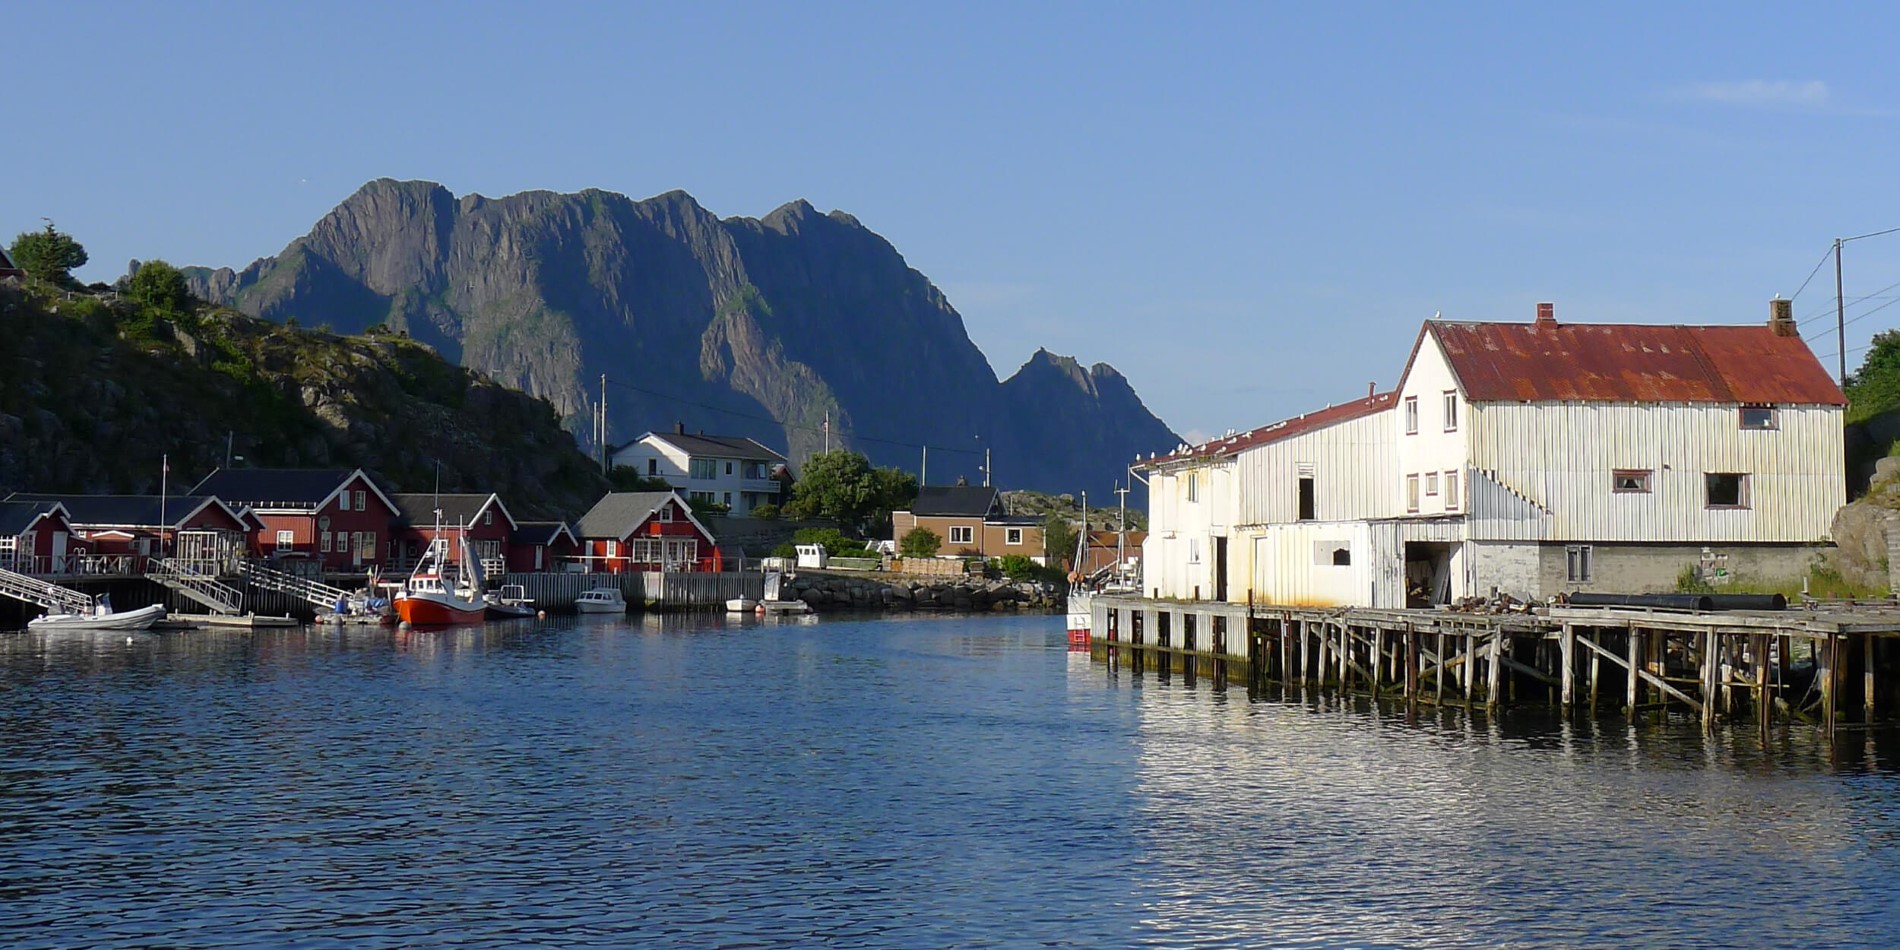 A boat is docked next to a body of water with Lofoten in the background